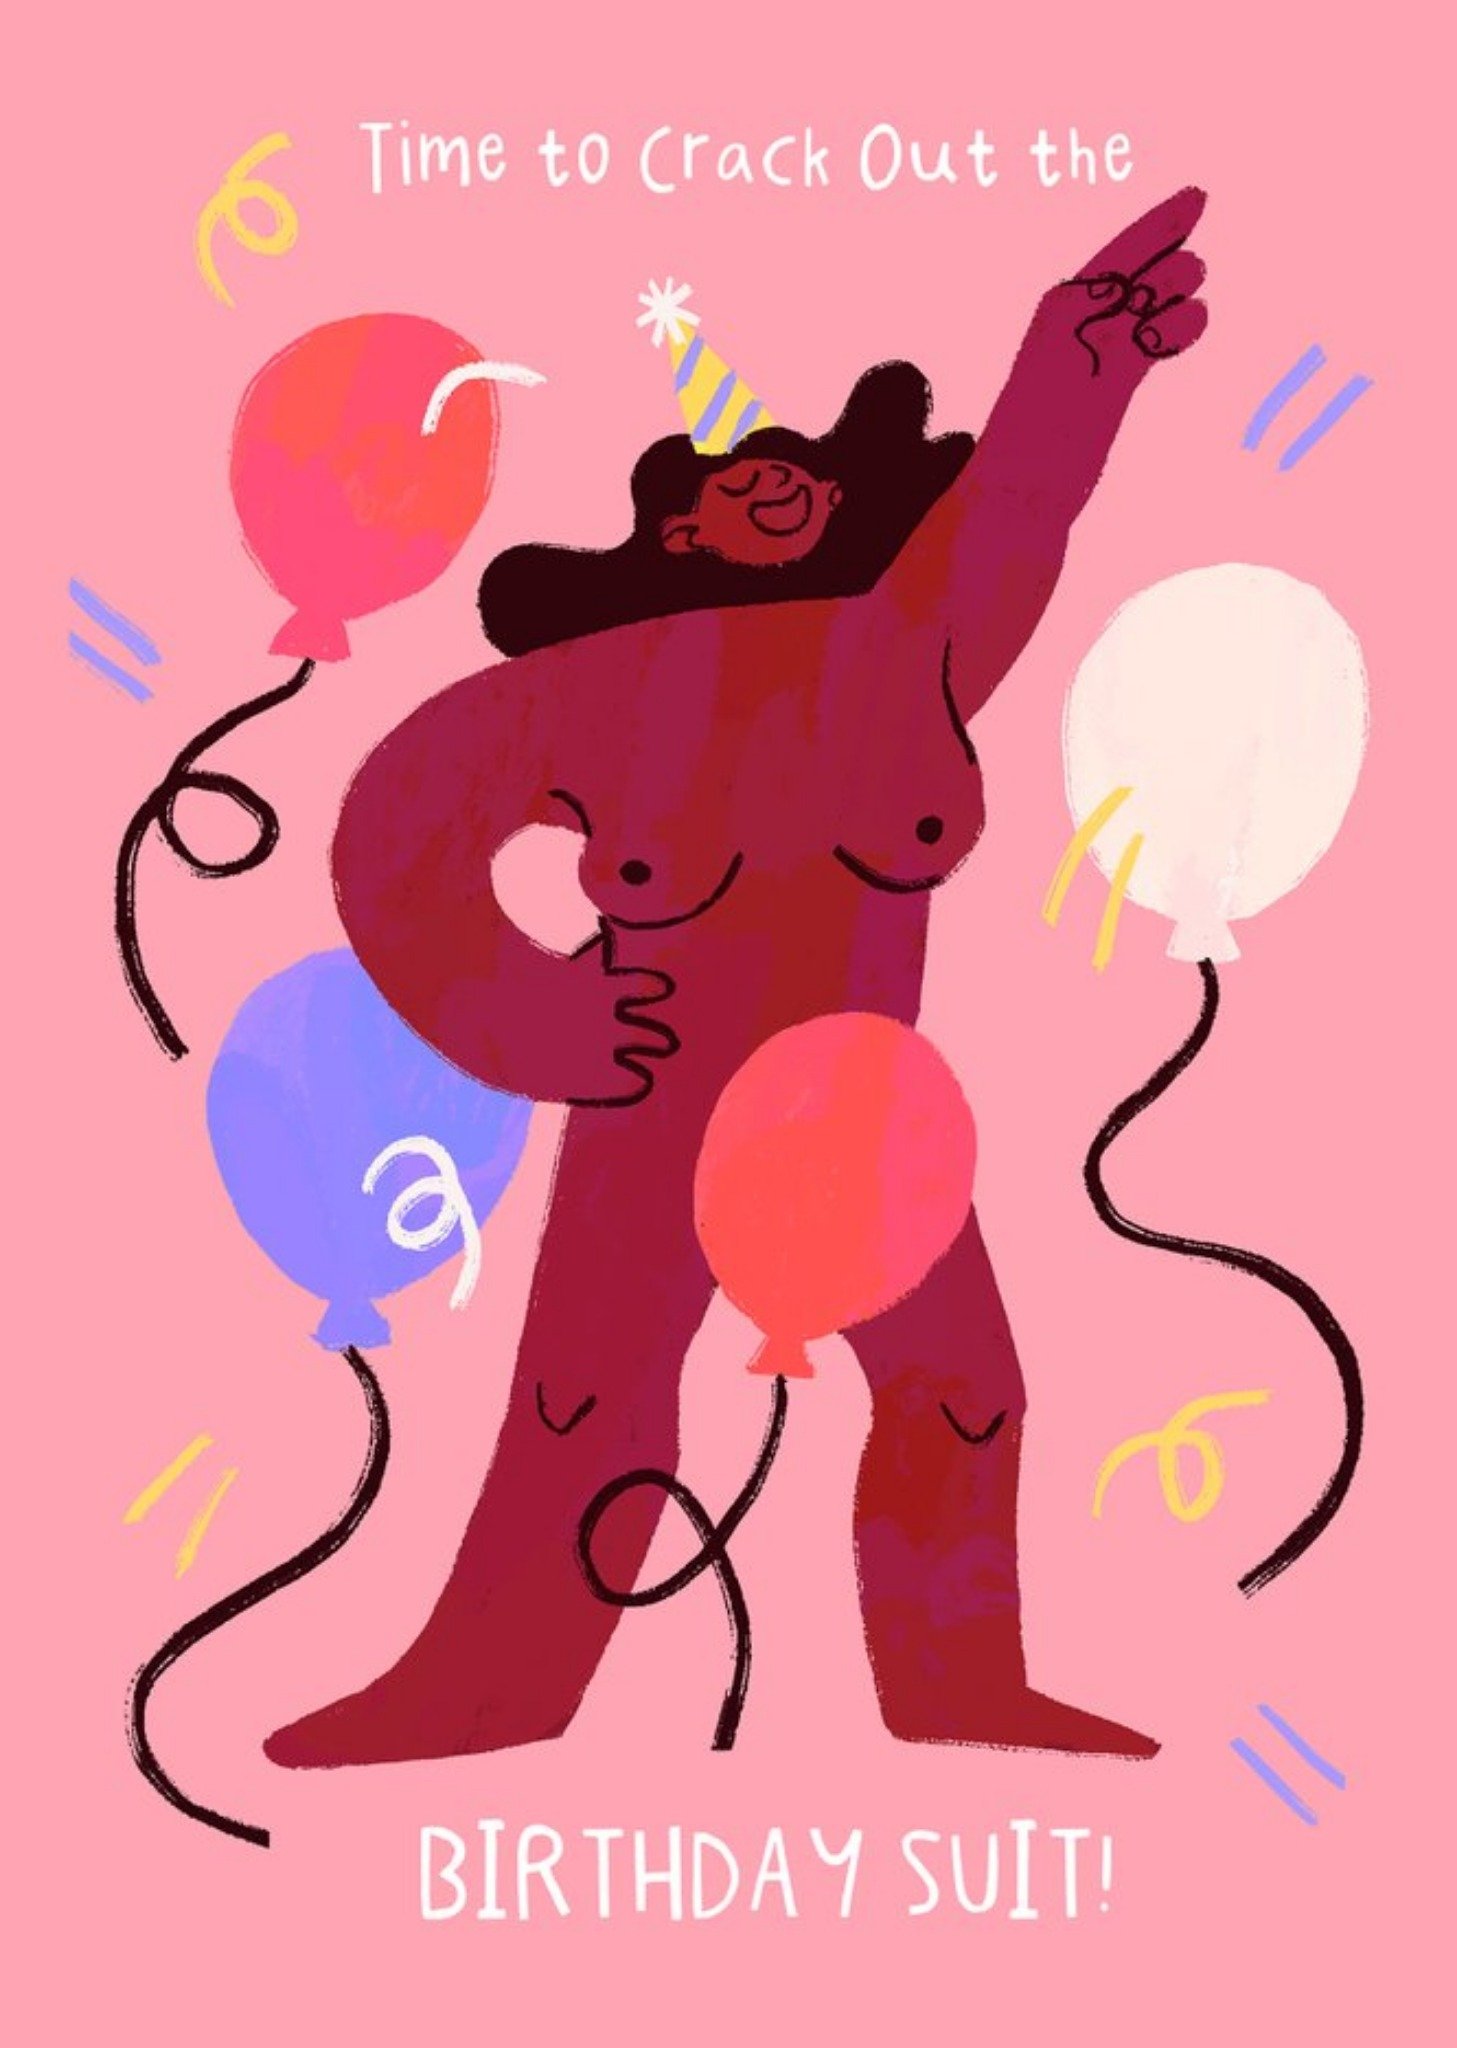 Moonpig Crack Out The Birthday Suit Femaile Illustrated Card, Large